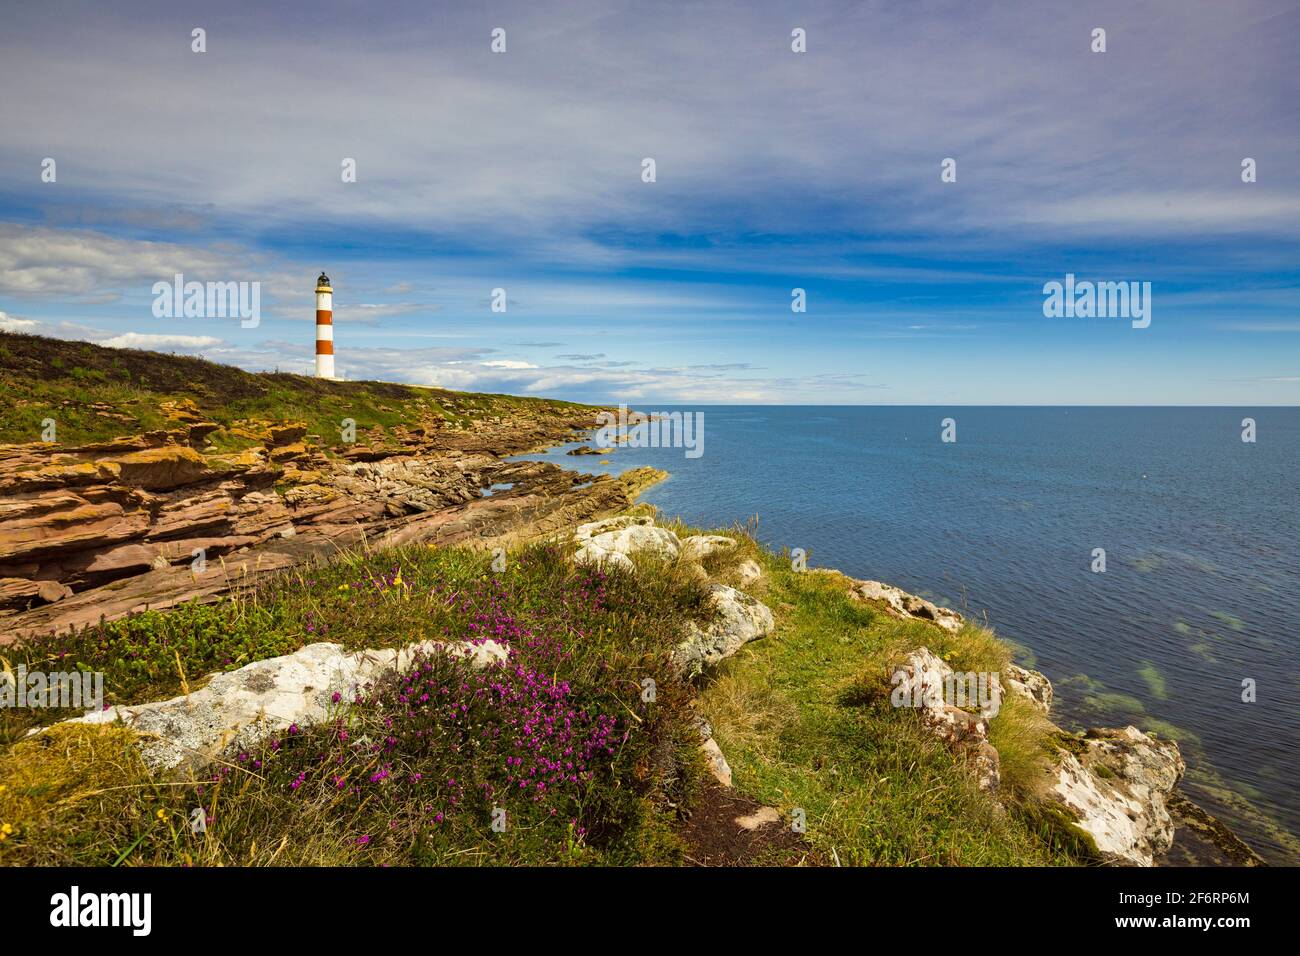 Heather on the cliff edge at Tarbat Ness with the lighthouse in the background. Stock Photo